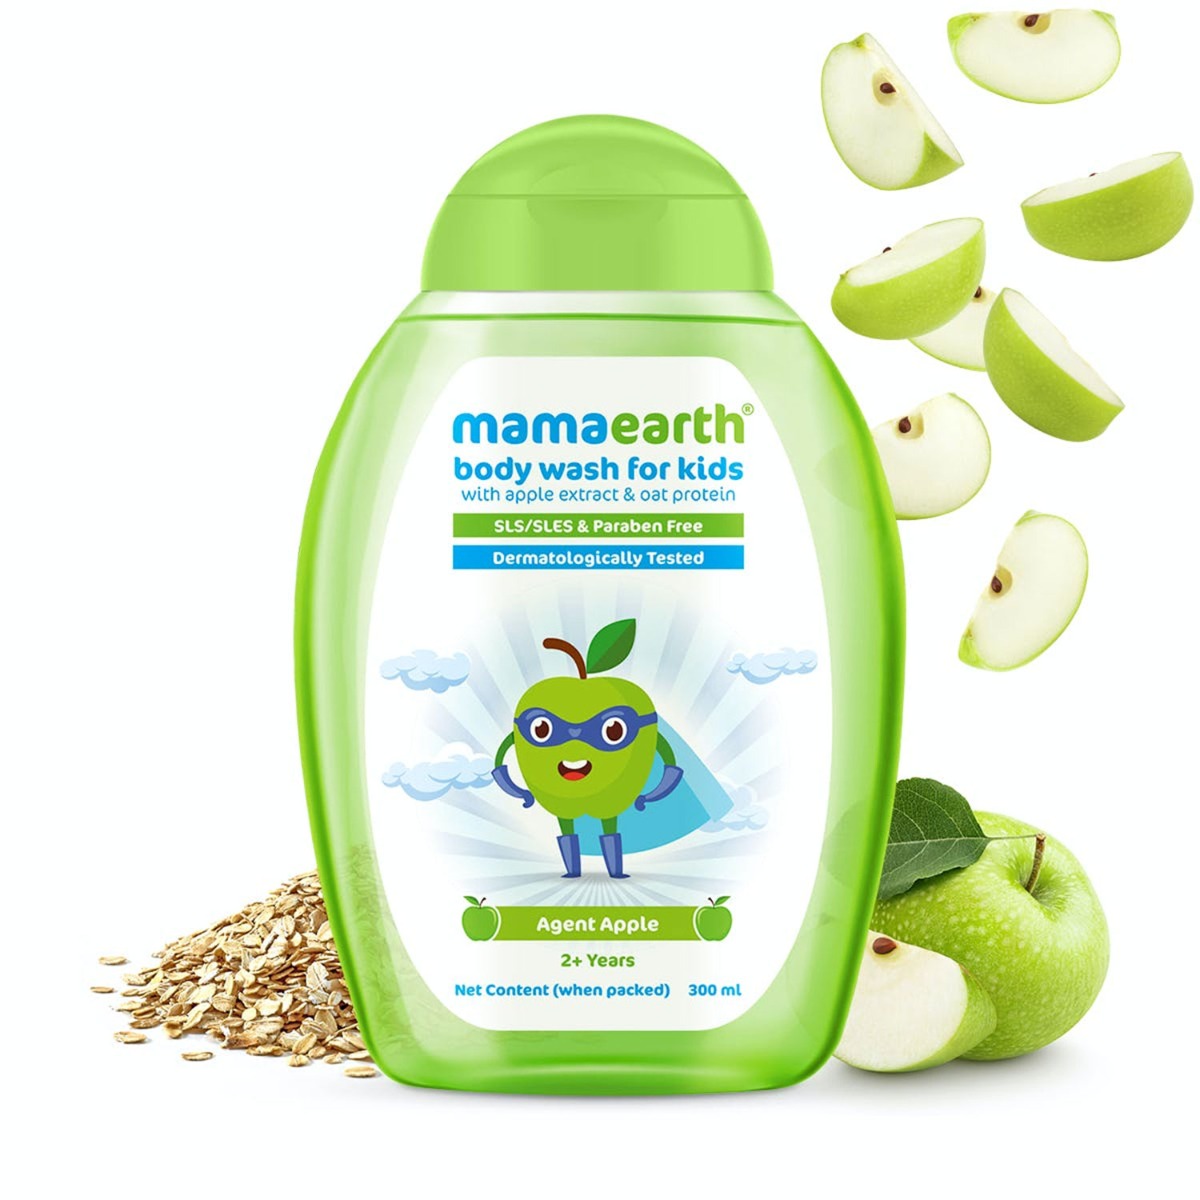 MamaEarth Body Wash for Kids with Apple Extract & Oat Protein, 300ml